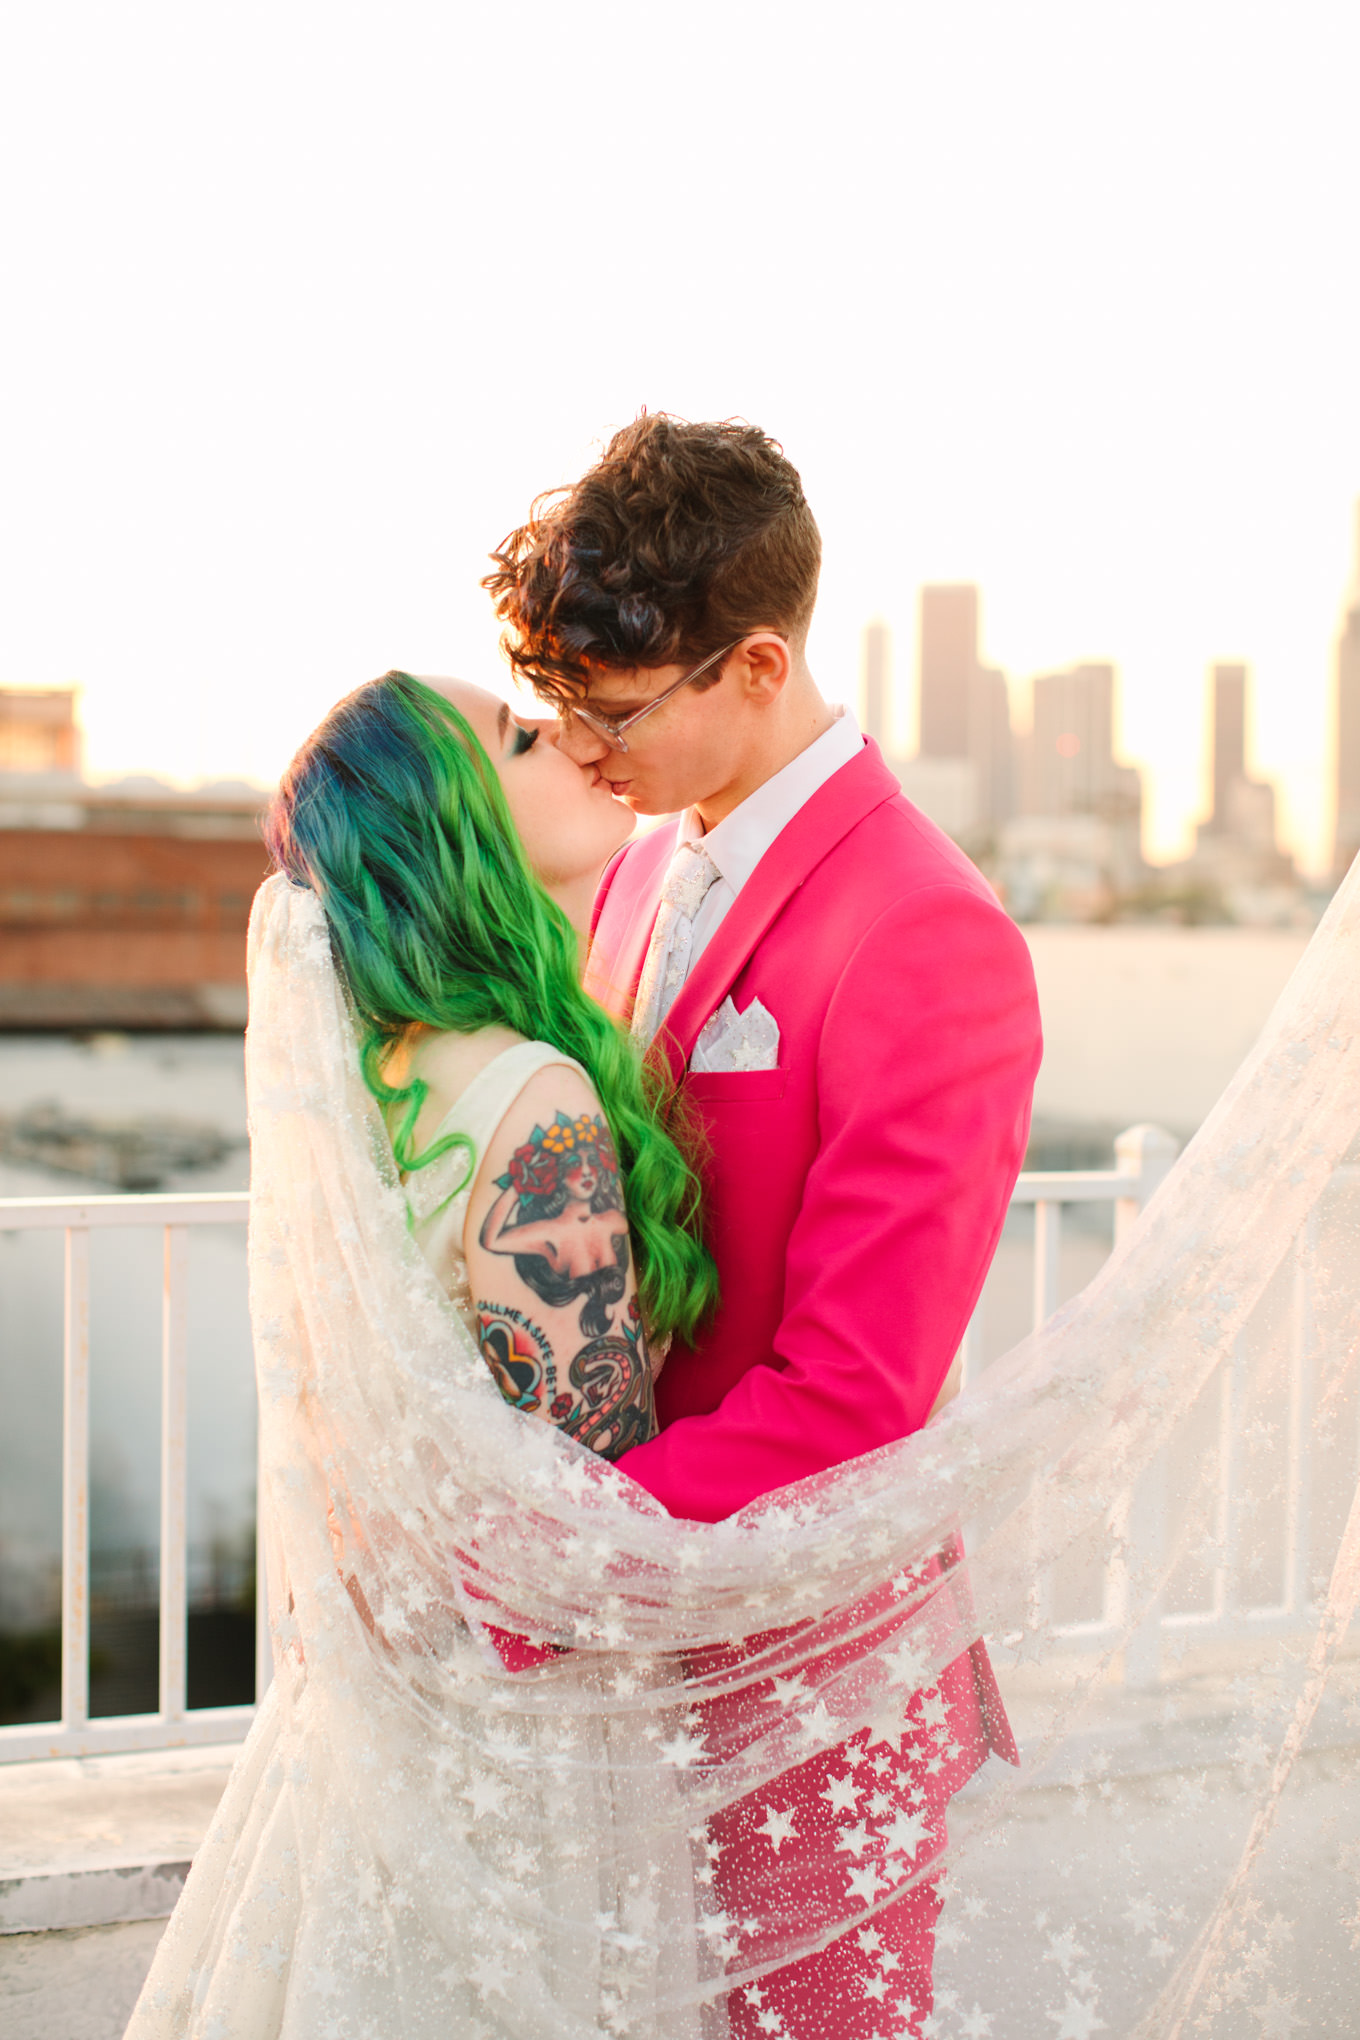 Portraits on rooftop with green hair bride in star gown and groom in hot pink suit | Colorful wedding at The Unique Space Los Angeles published in The Knot Magazine | Fresh and colorful photography for fun-loving couples in Southern California | #colorfulwedding #losangeleswedding #weddingphotography #uniquespace Source: Mary Costa Photography | Los Angeles